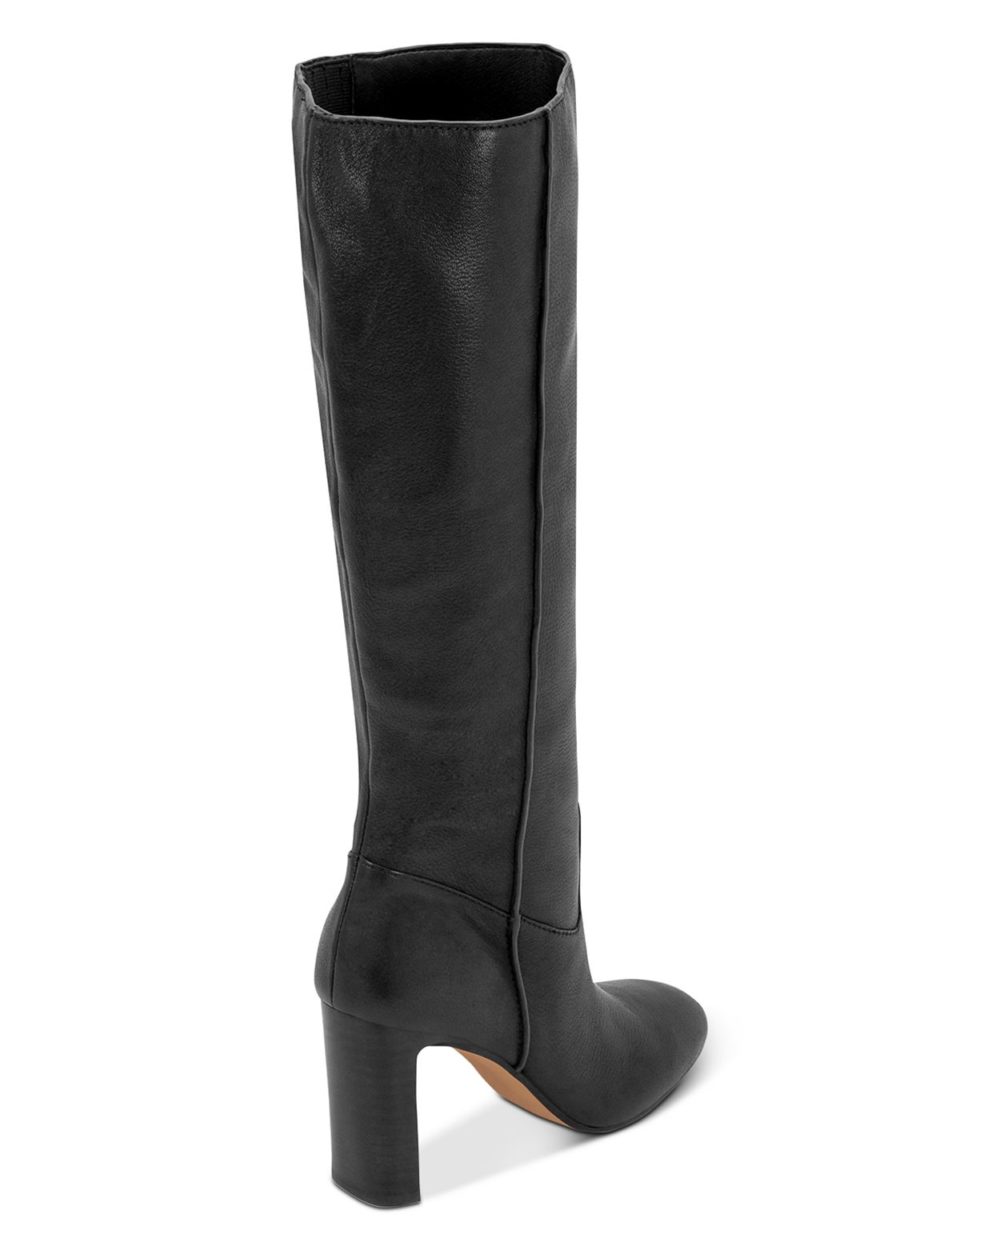 woocommerce-673321-2209615.cloudwaysapps.com-dolce-vita-womens-black-leather-davey-knee-high-boots